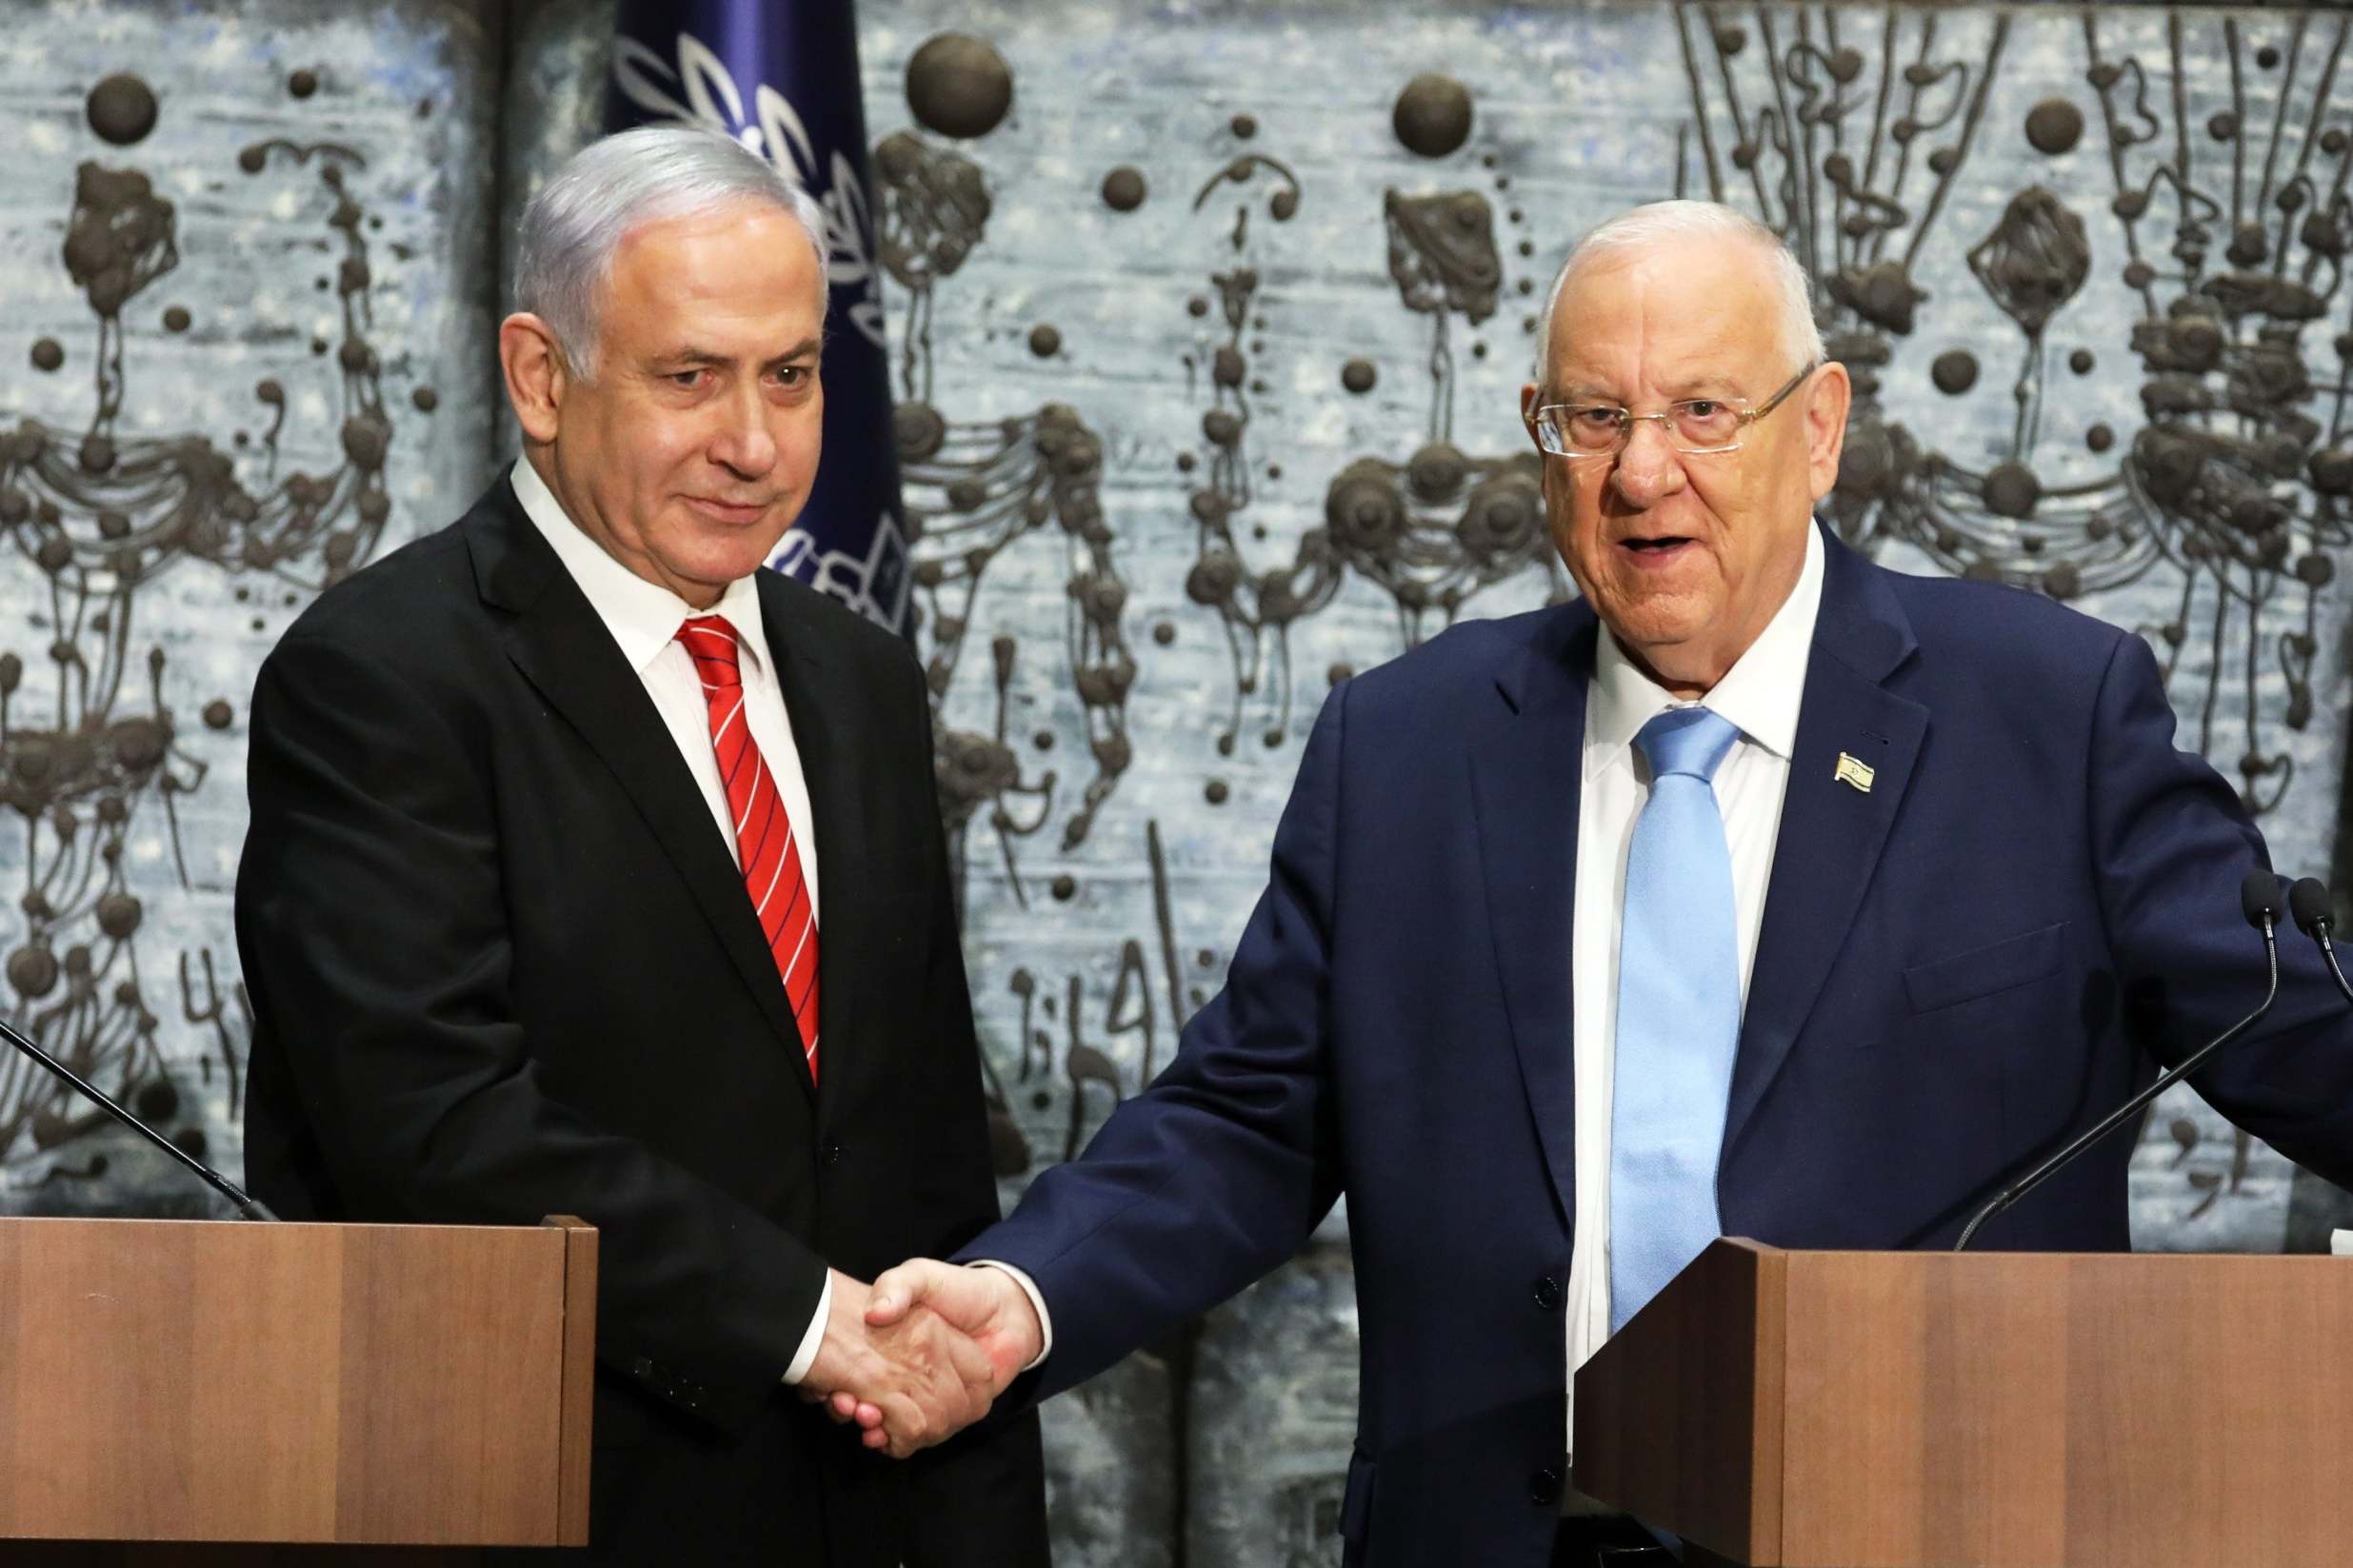 Israel's president Reuven Rivlin has tasked Benjamin Netanyahu with forming the new government